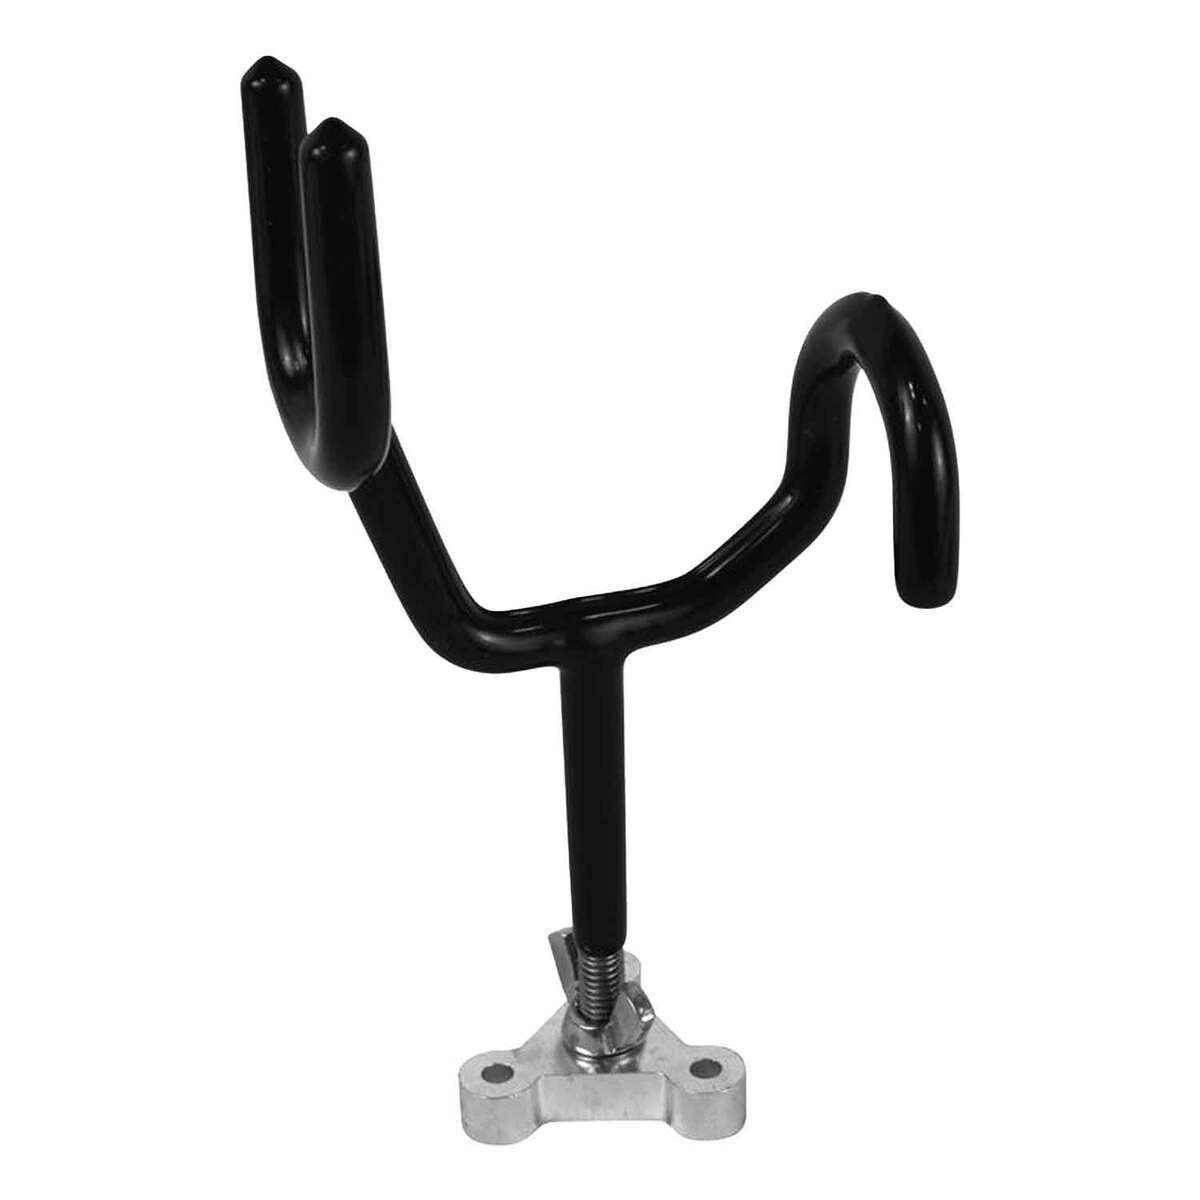 Attwood Sure-Grip Stainless Steel Rod Holder - 4 